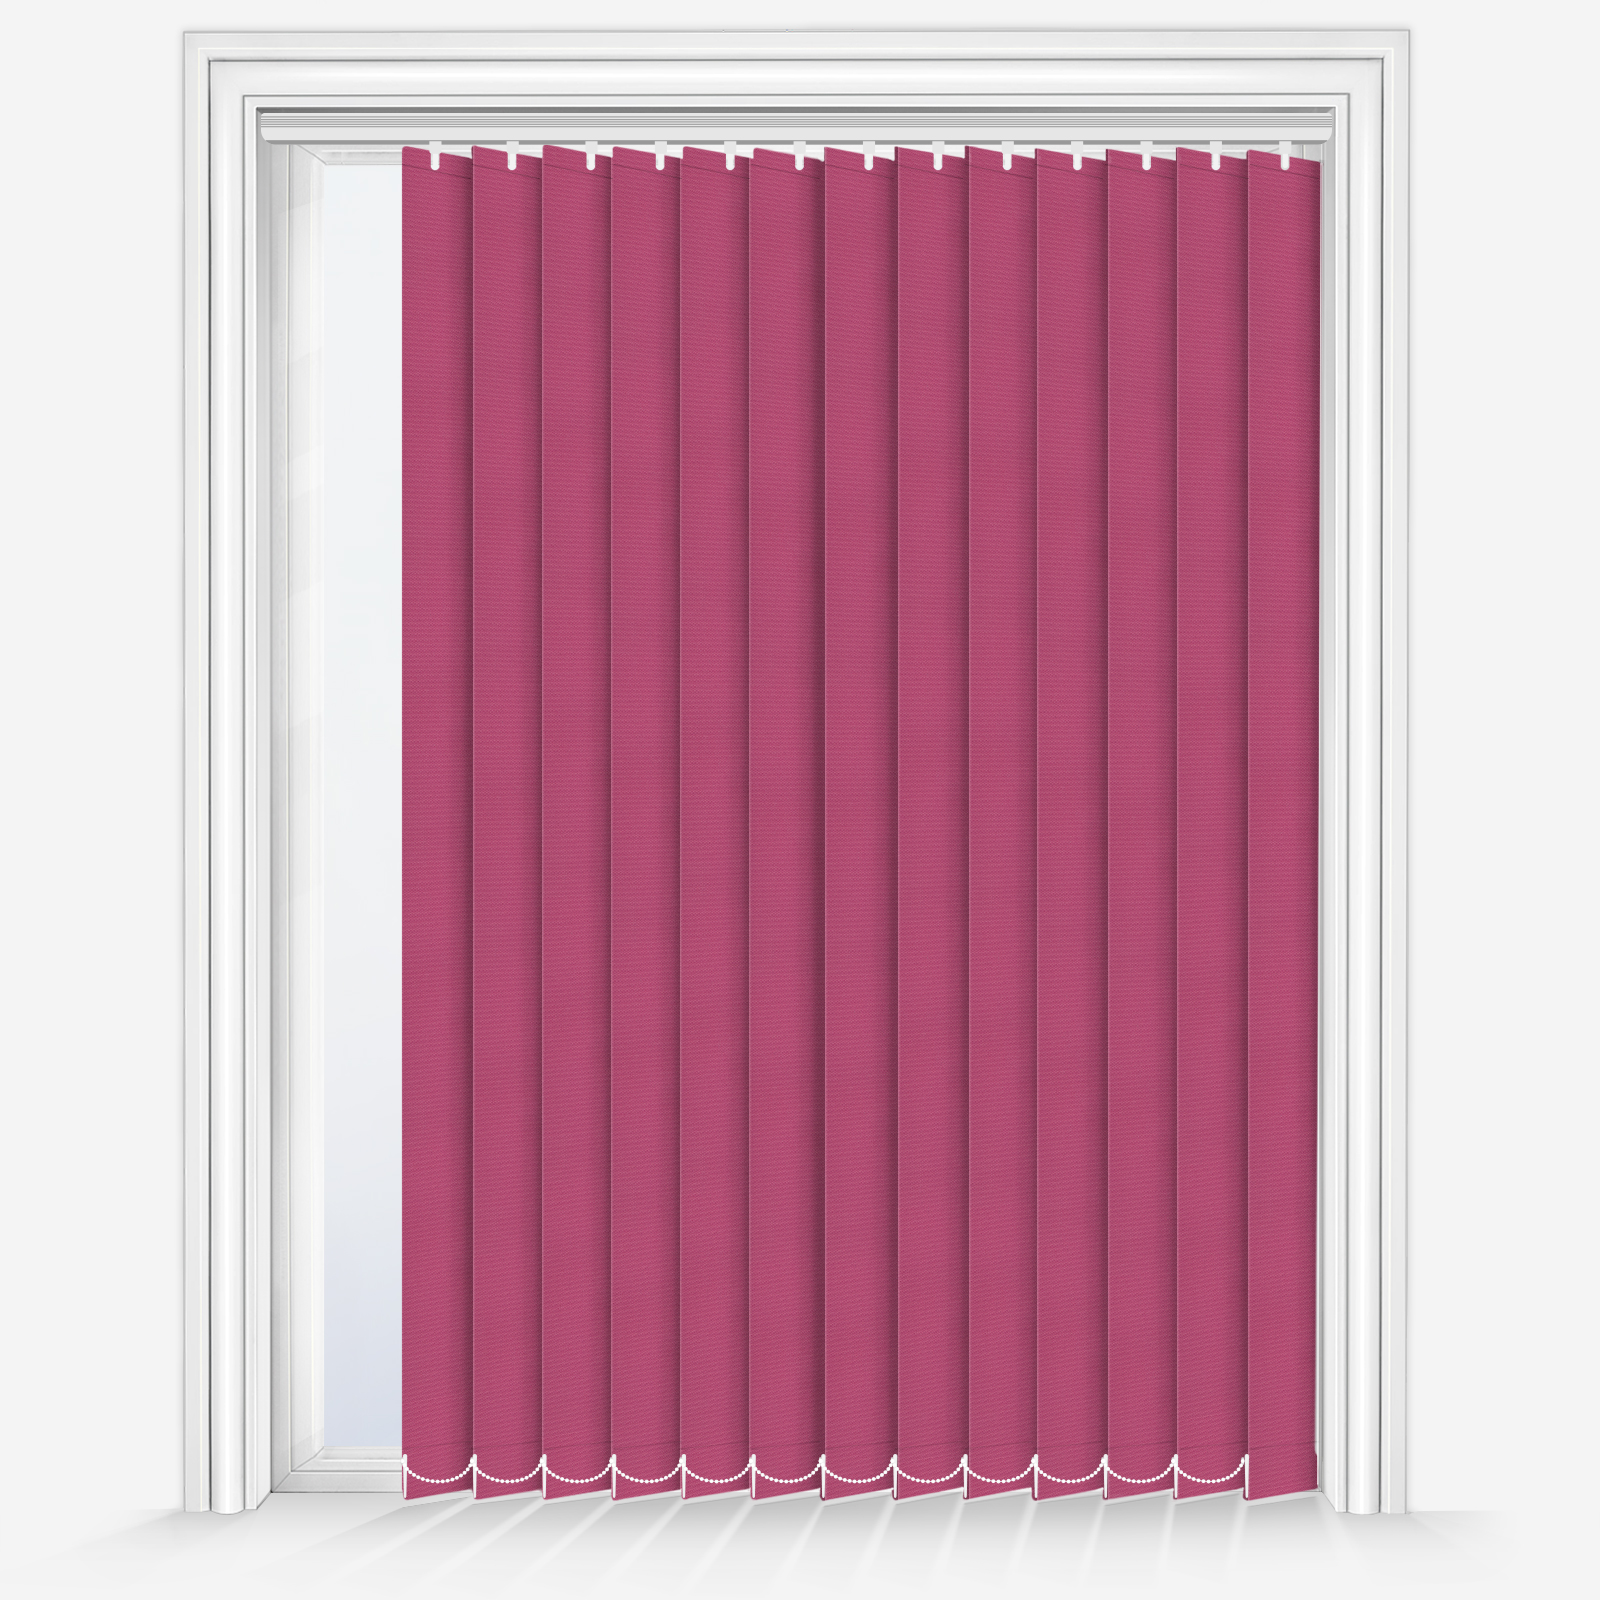 Serese Pink Made to Measure Replacement Vertical Blind Slats Louvres 89mm 